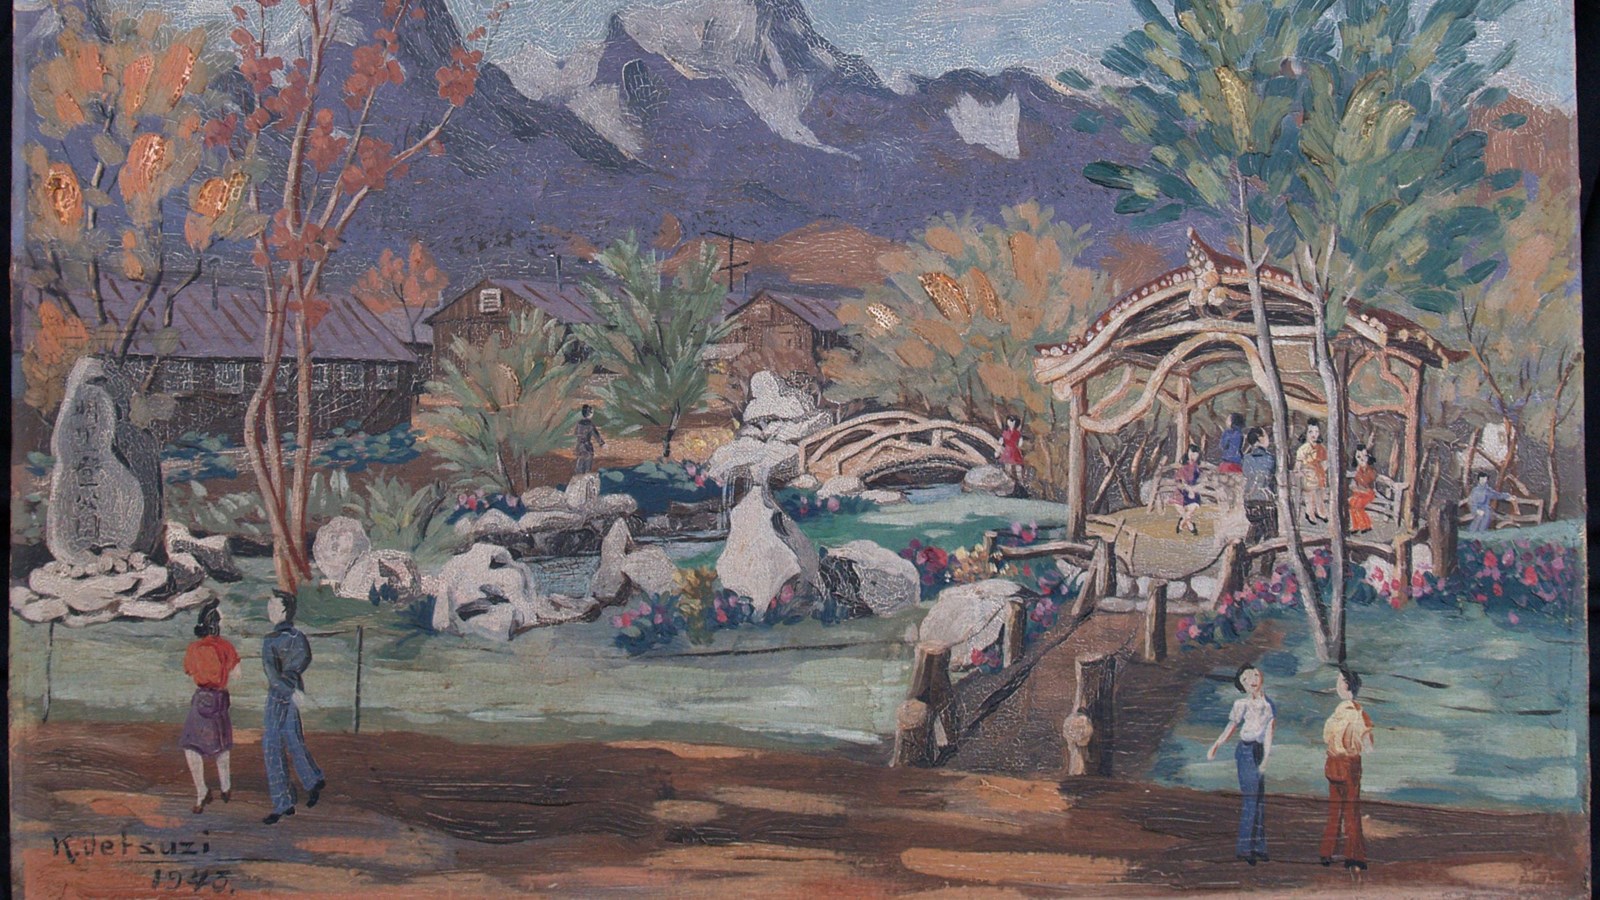 A colorful painting of Merritt Park by K. Uetsuzi from 1943